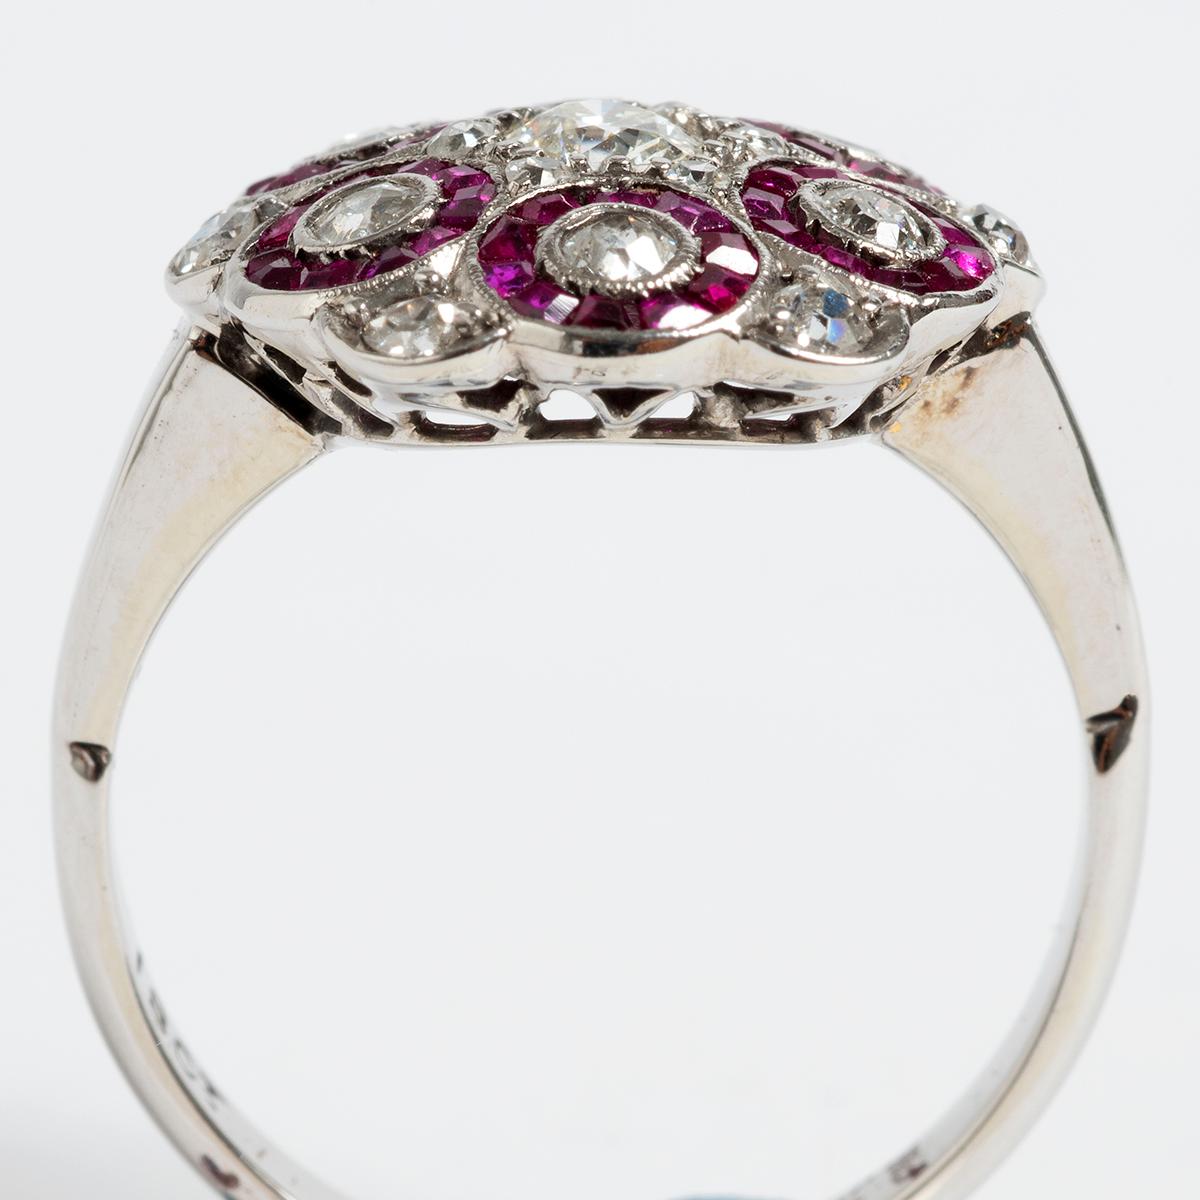 Mixed Cut Ruby & Diamond Flower Ring, 18K White Gold Setting, 1940's, US Size 5.75 For Sale